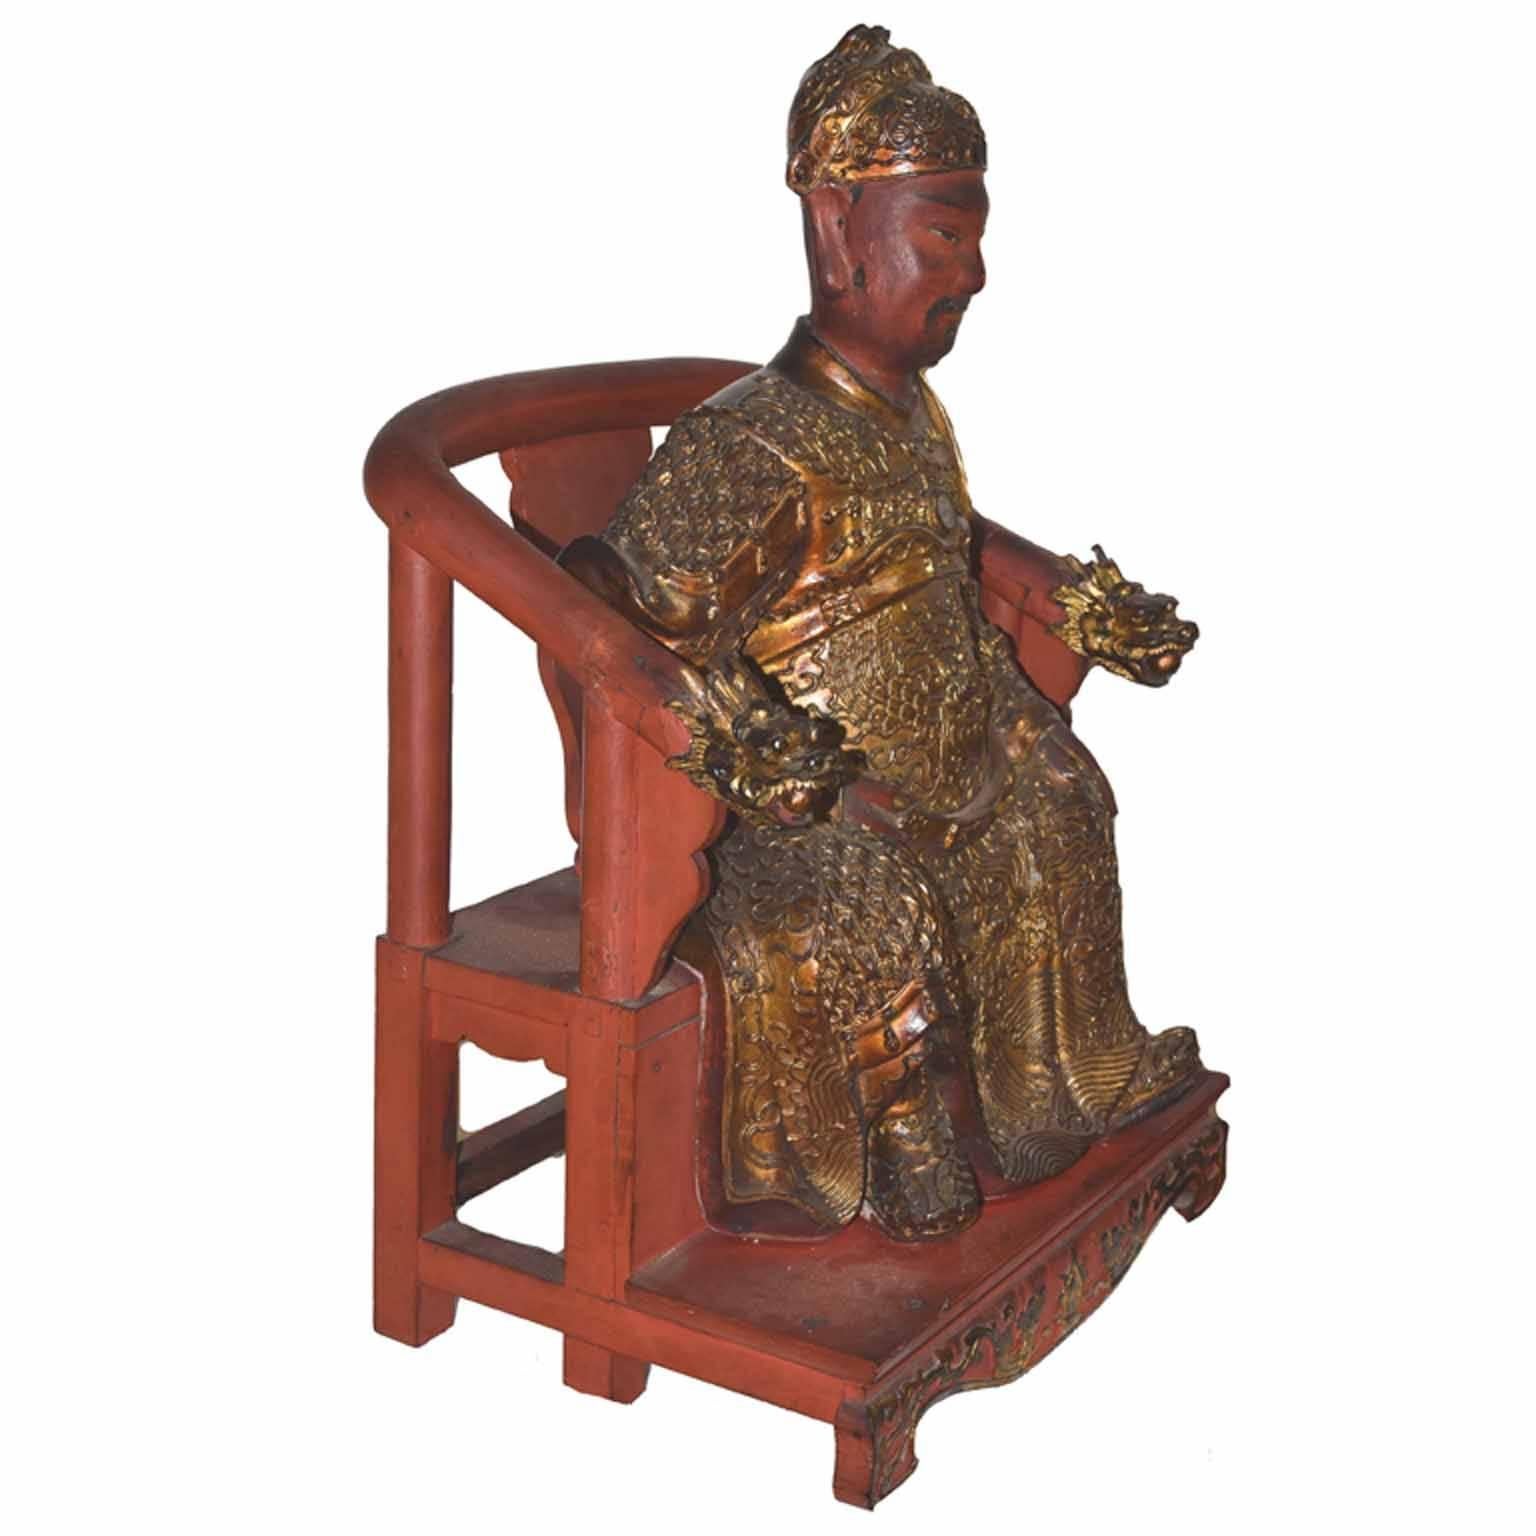 Antique Chinese gold leaf hand-carved period figure of a mandarin aristocrat seated on a dragon armed throne chair, wearing an elaborate silk embroidered robe, belted at the waist, with cloud scrolls, dragons and hanging tassels, a silvered mirror